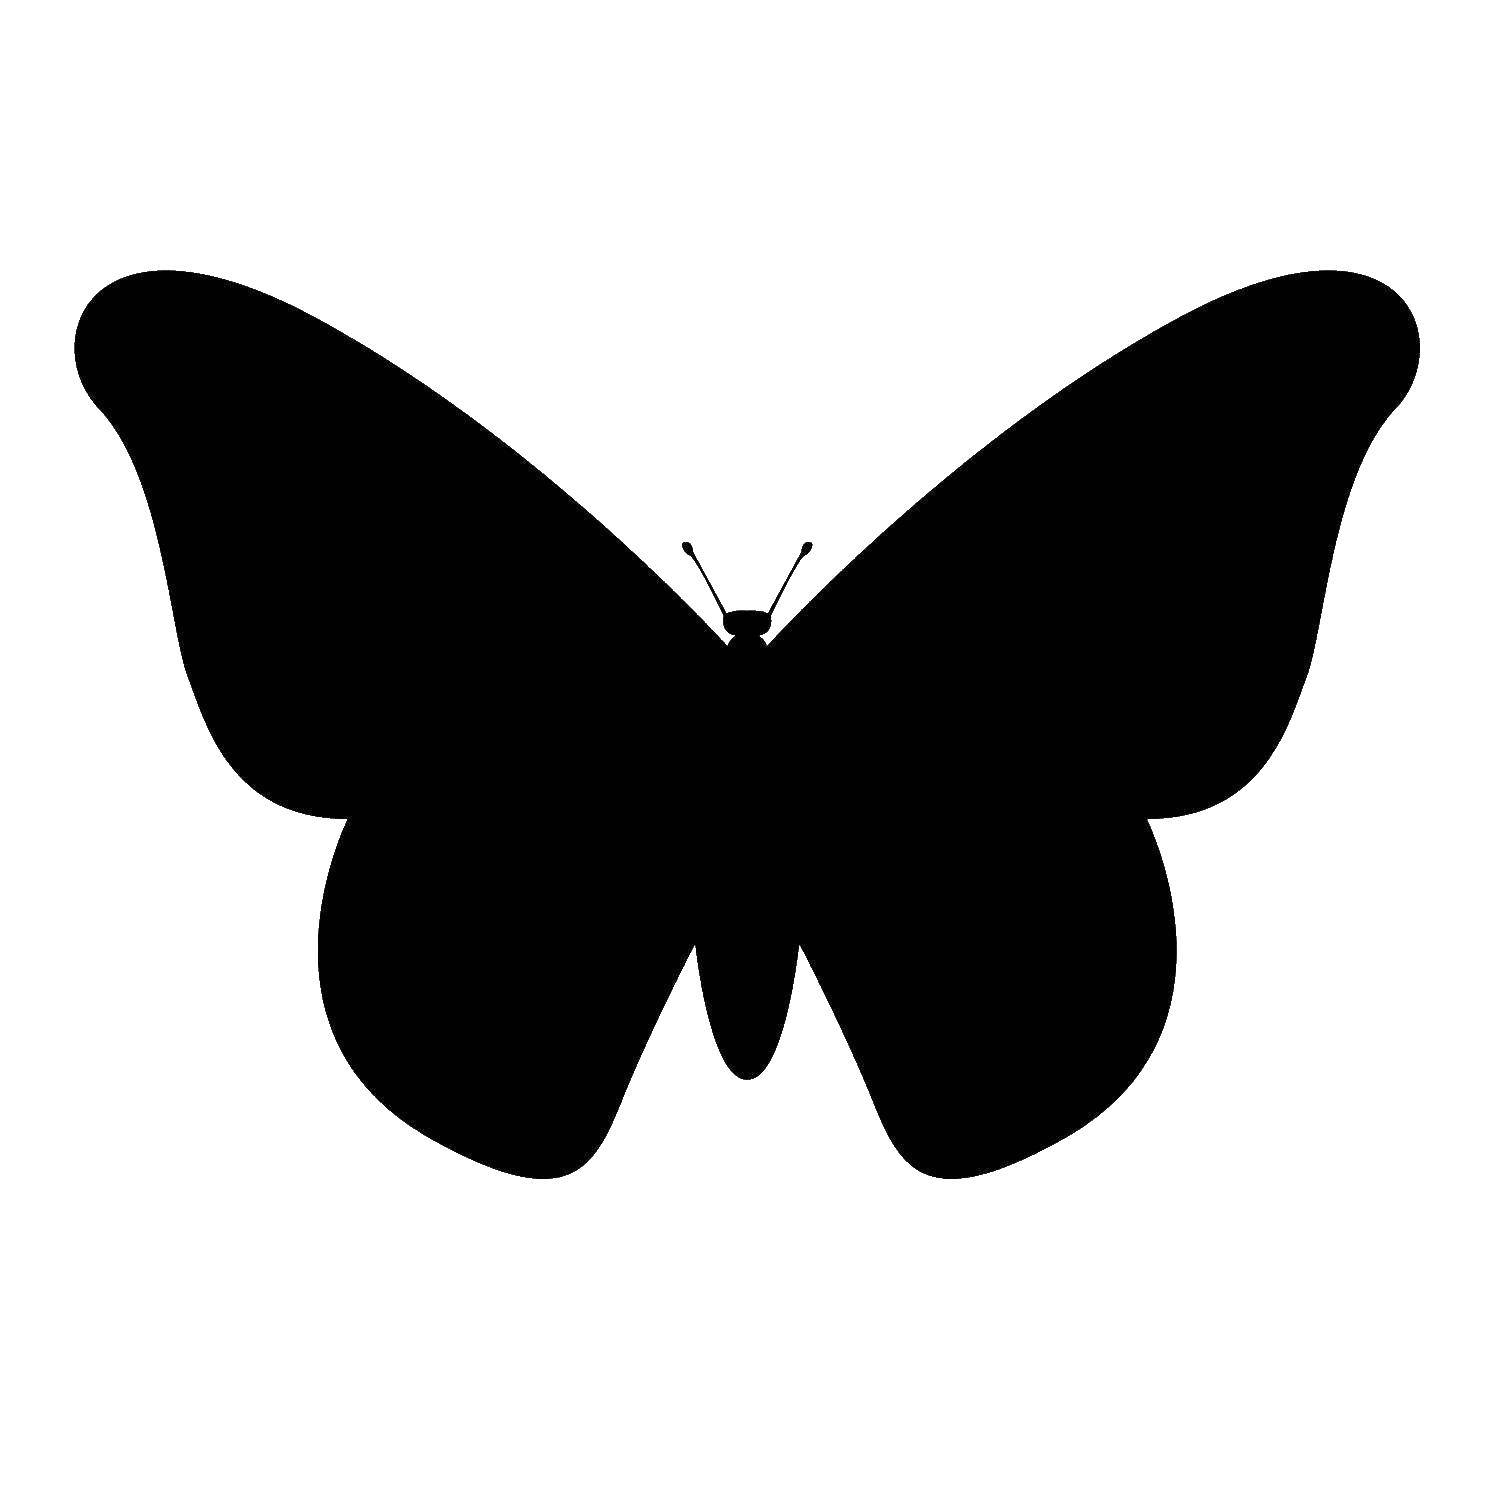 Coloring The outline of the butterfly. Category the contours of the butterflies to cut. Tags:  the contours, butterfly.